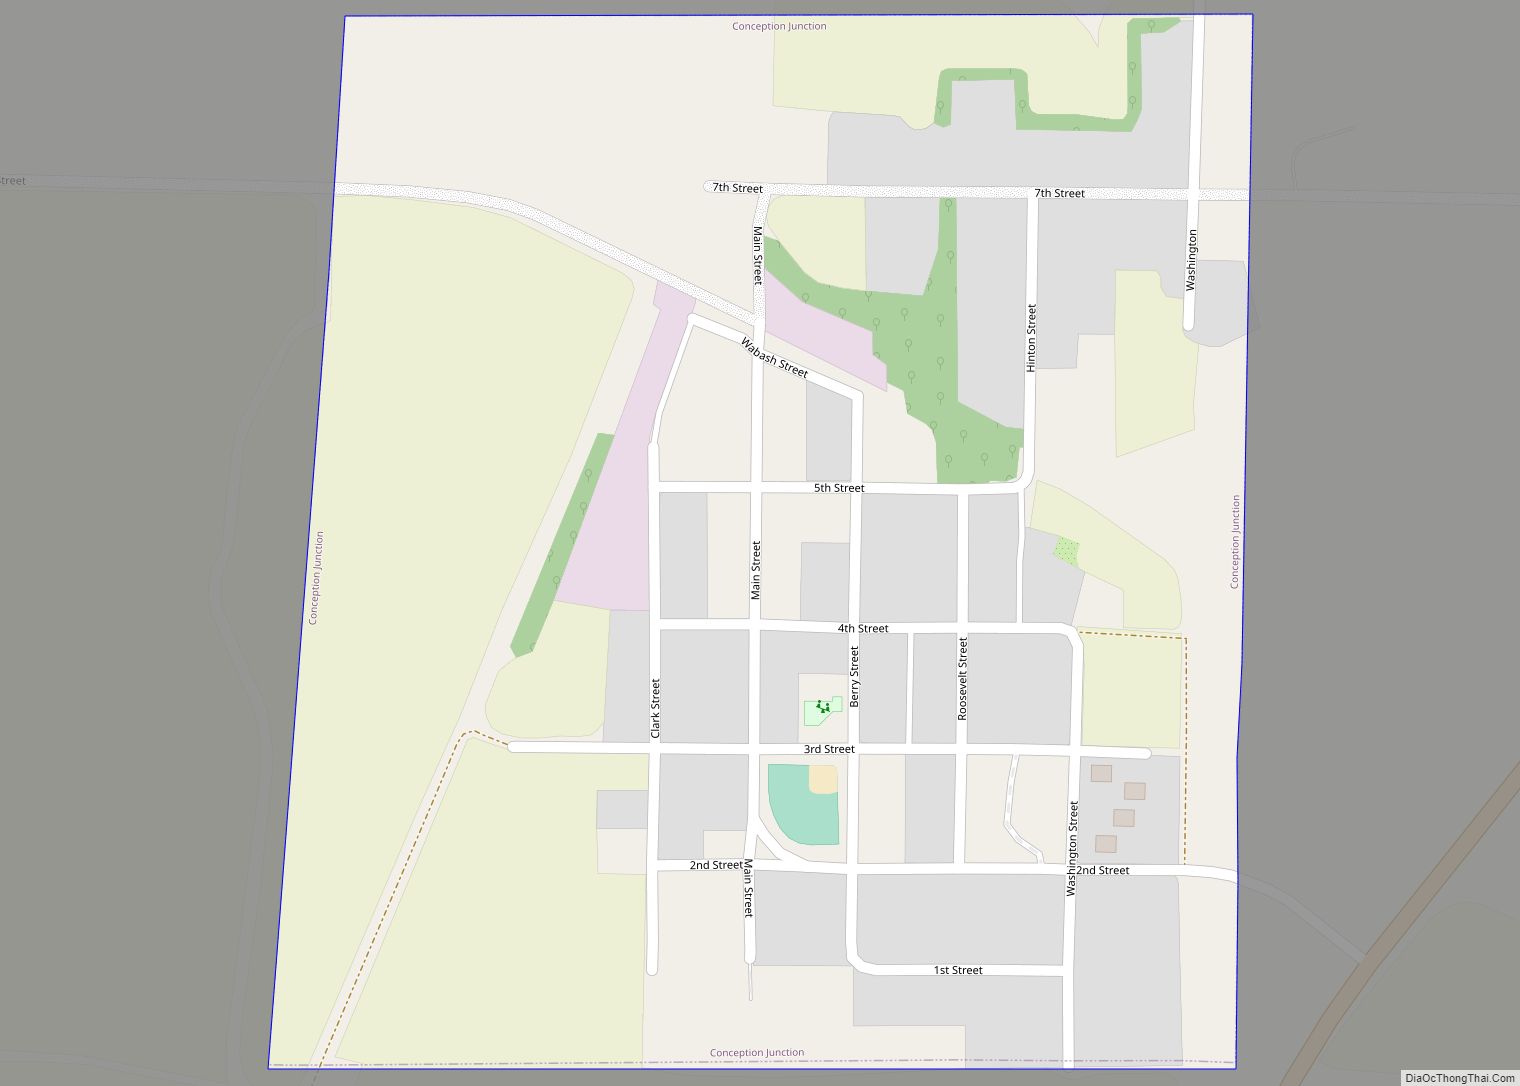 Map of Conception Junction town